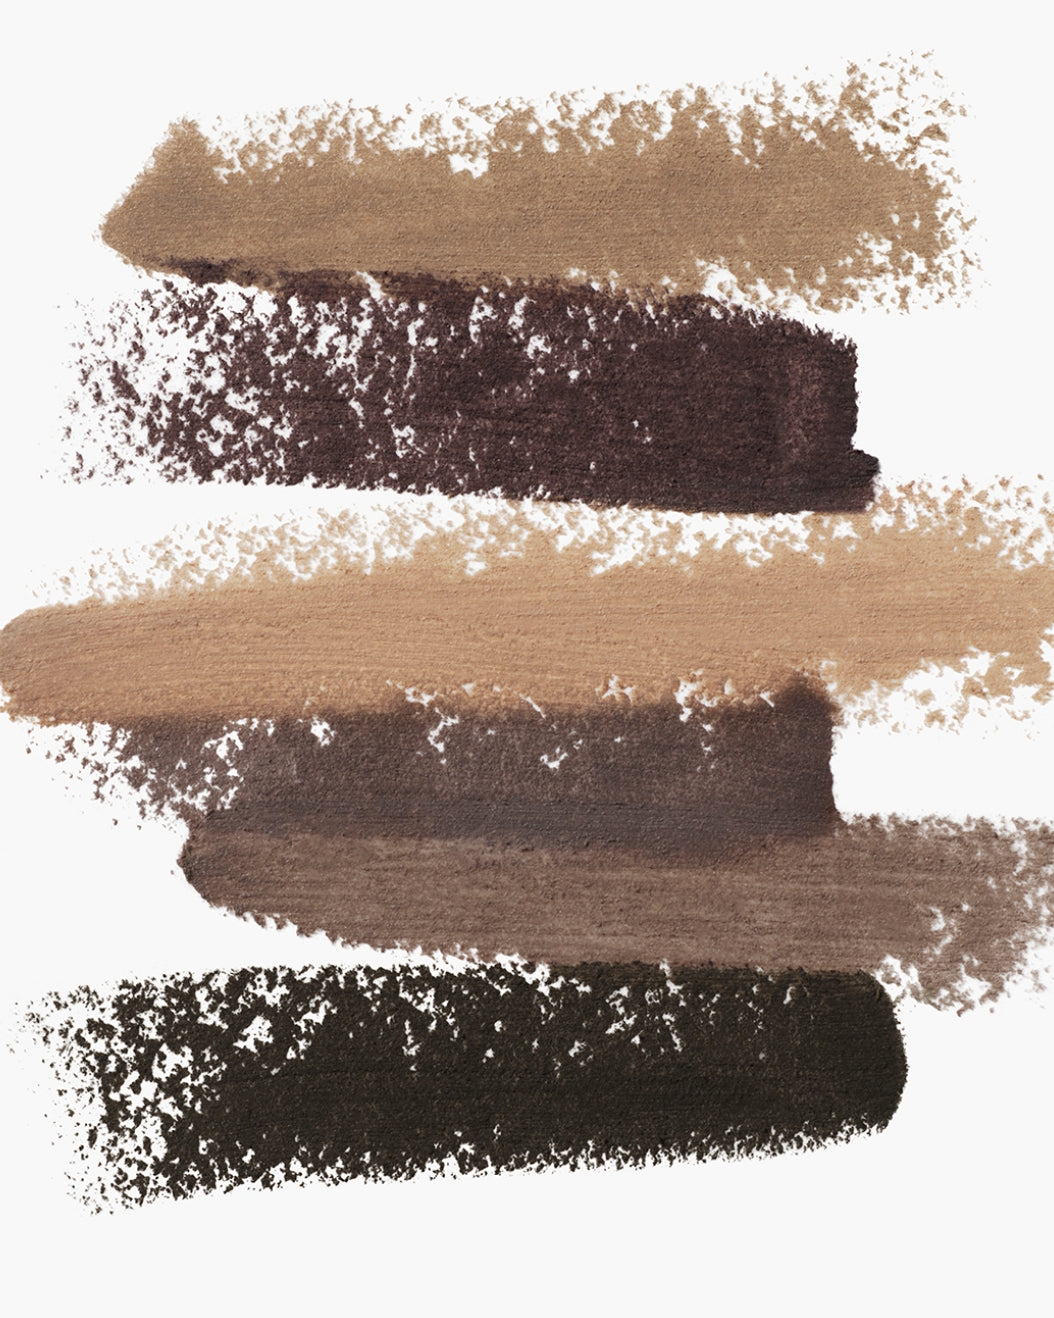 Six shades of Milk Makeup KUSH Brow Shadow Stick swatched on model's arm